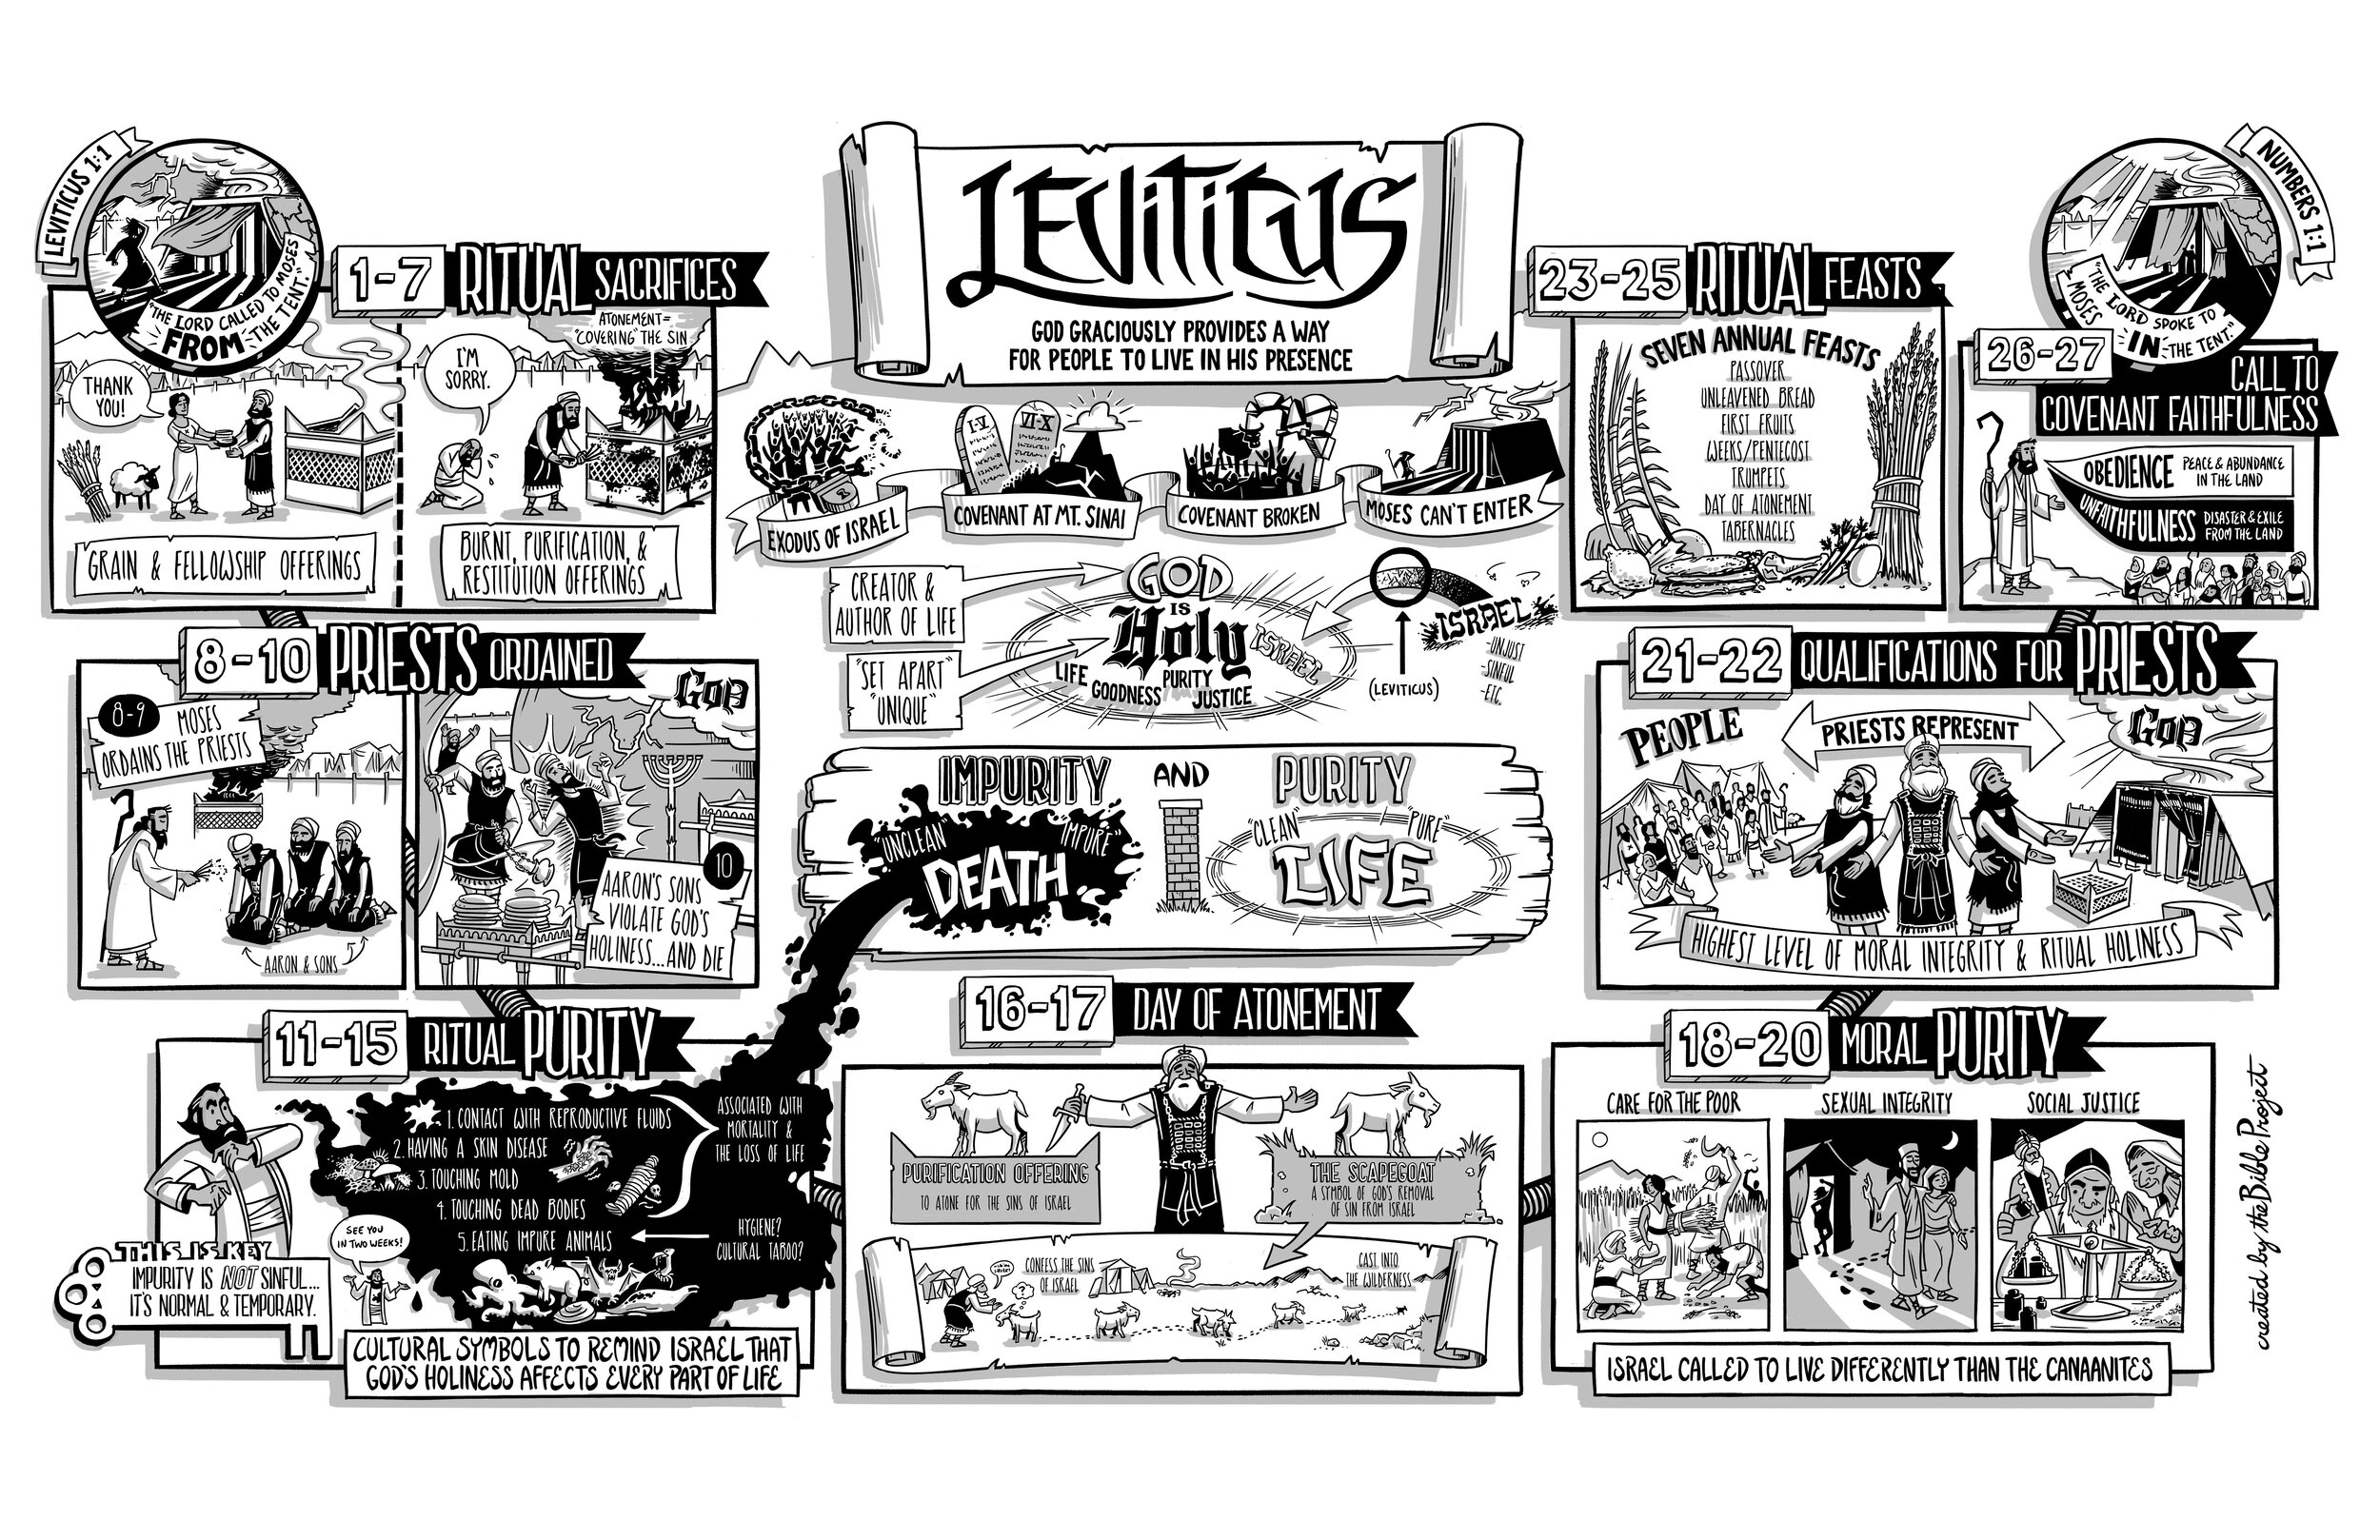 BibleProject: Leviticus (Video)